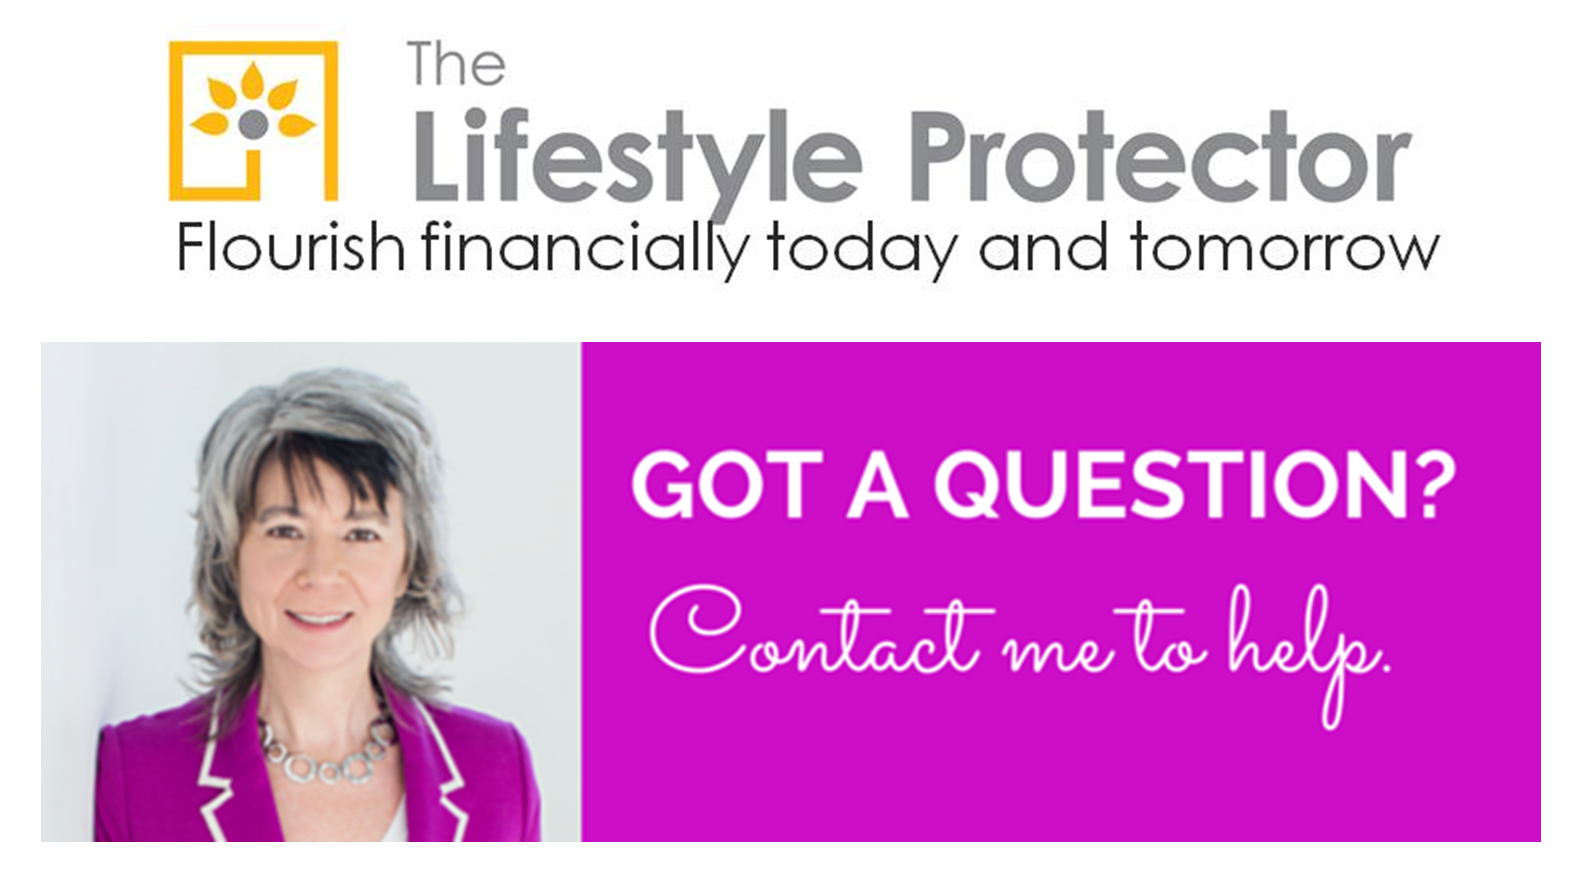 The Lifestyle Protector